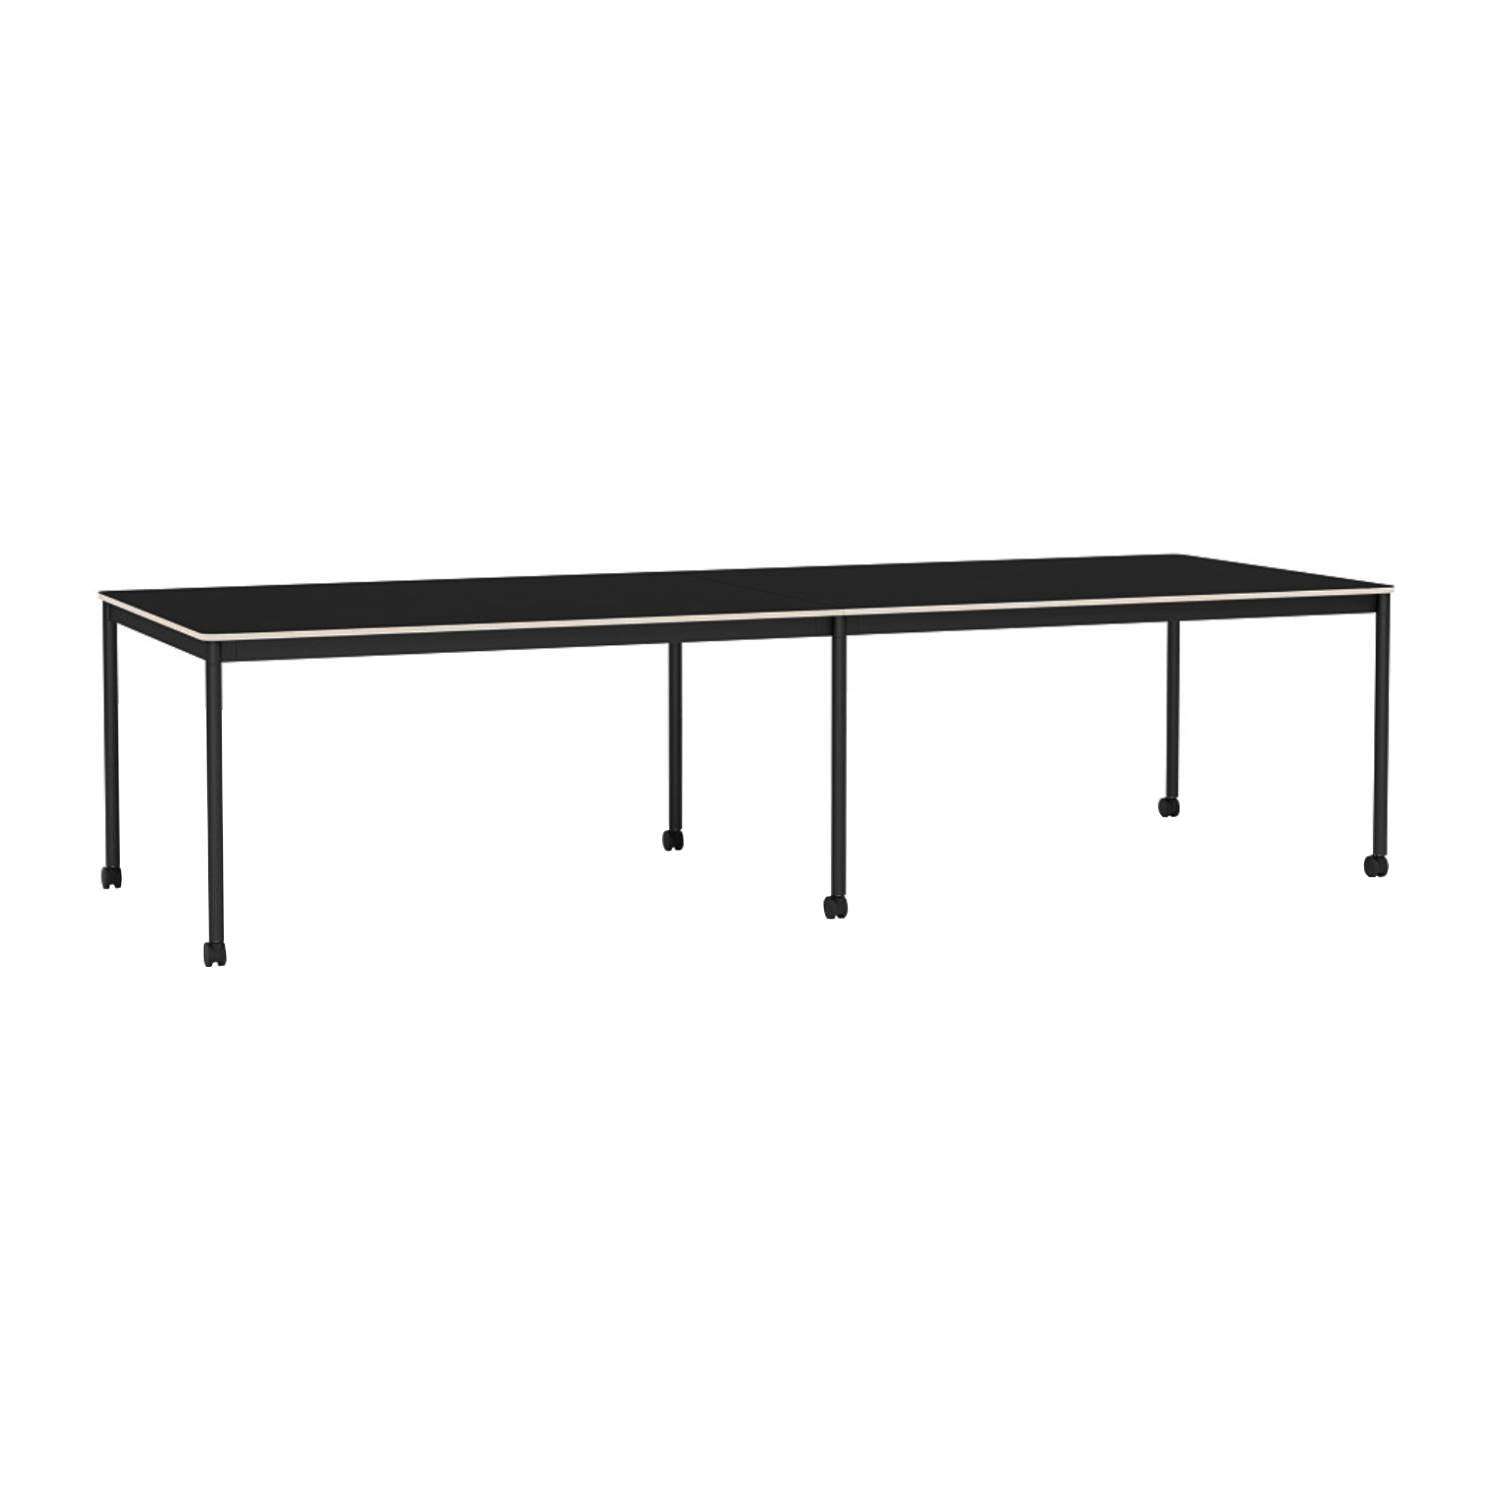 Base Table with Castors: Large + 118.1